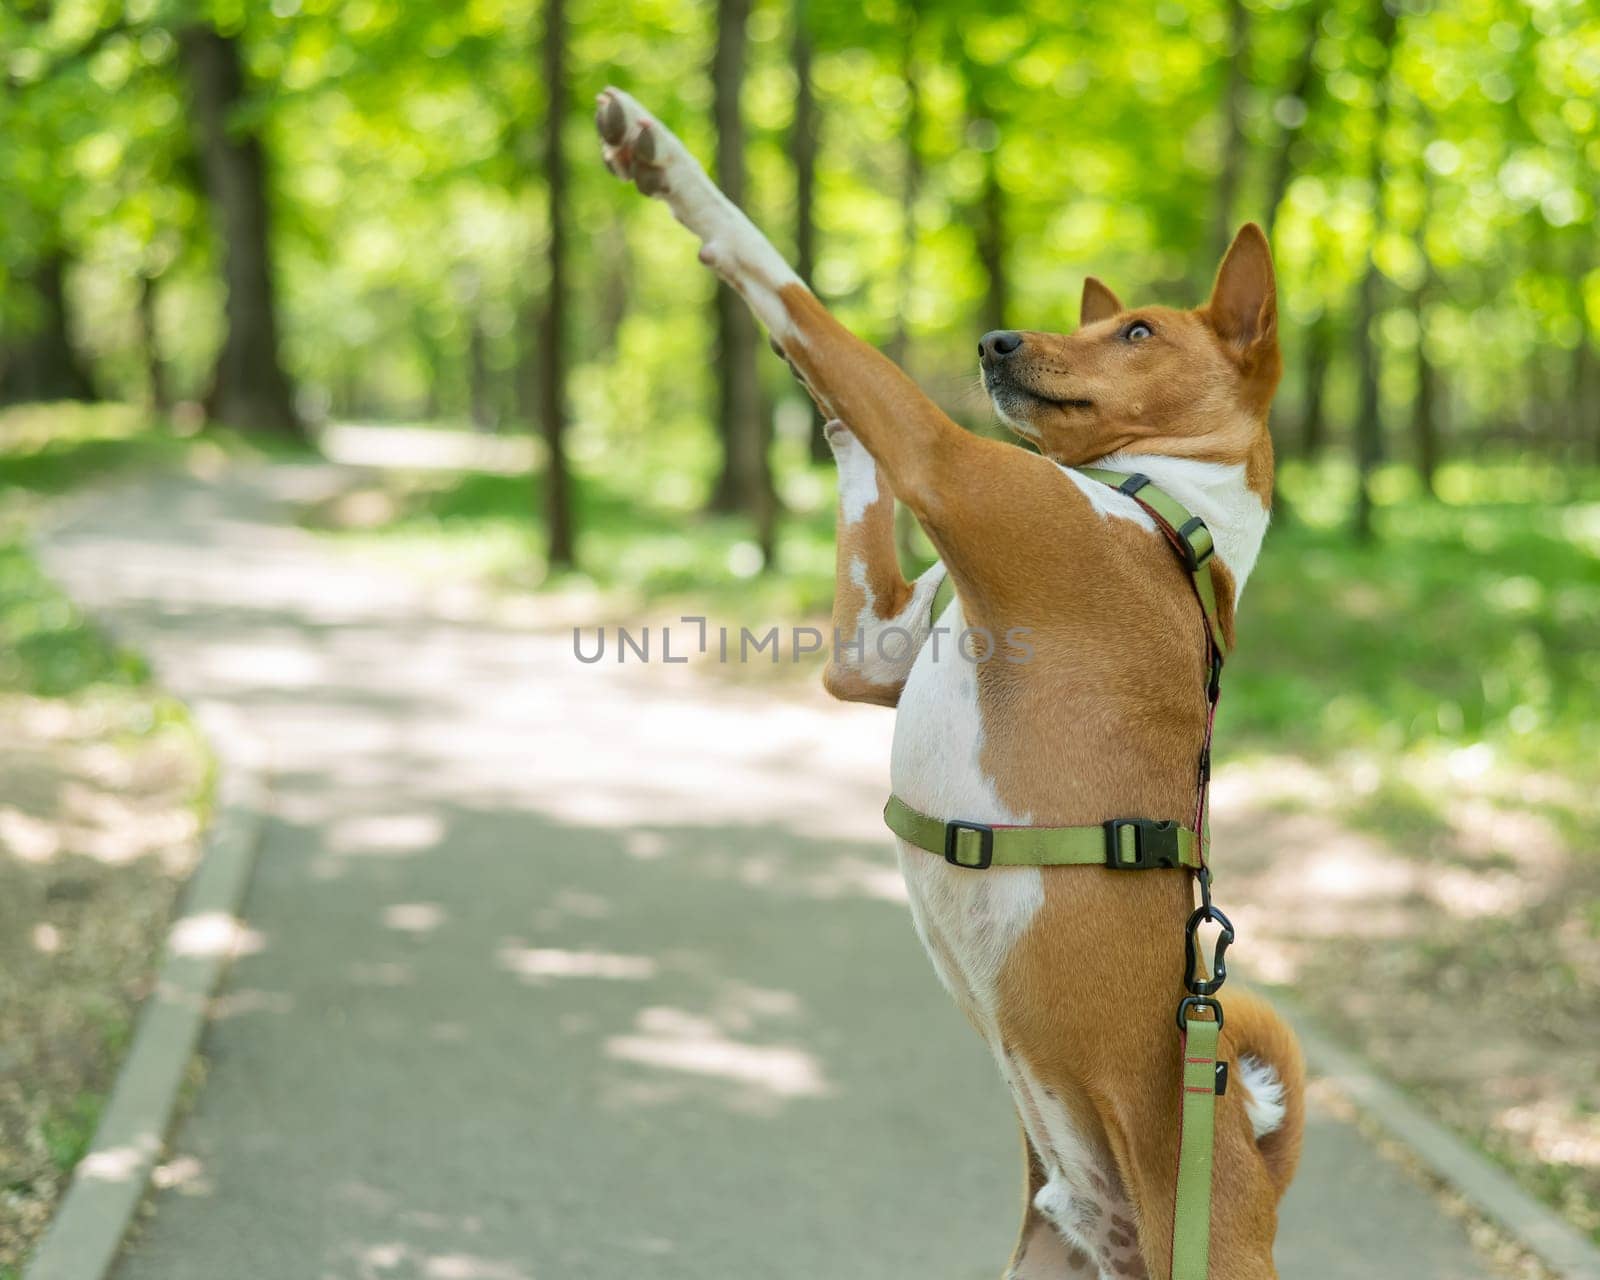 African barking basenji dog on hind legs in the park